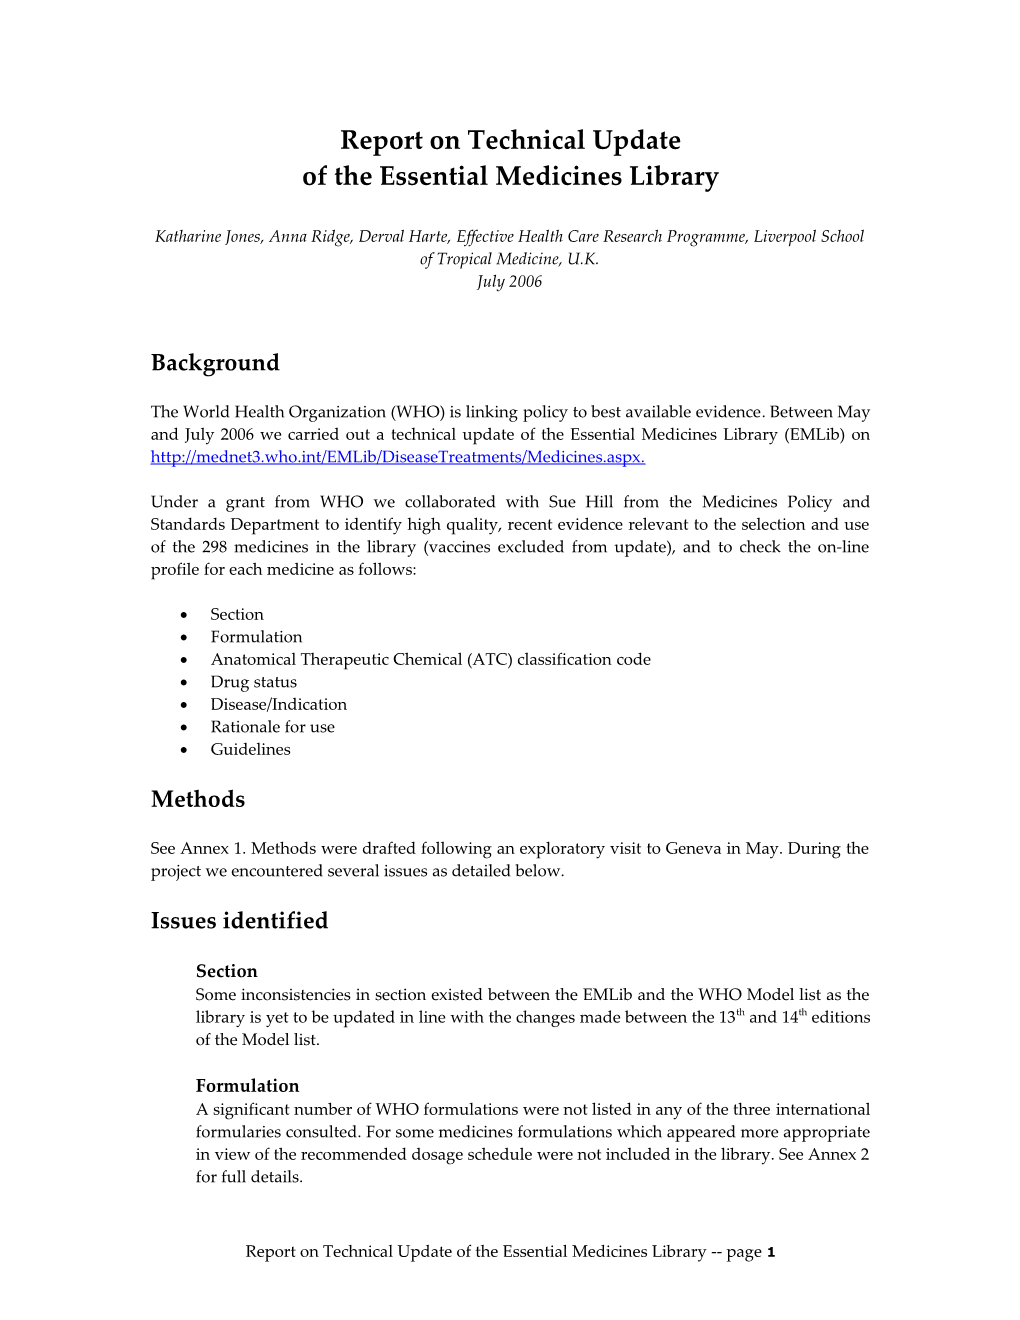 Report on Technical Update of the Essential Medicines Library